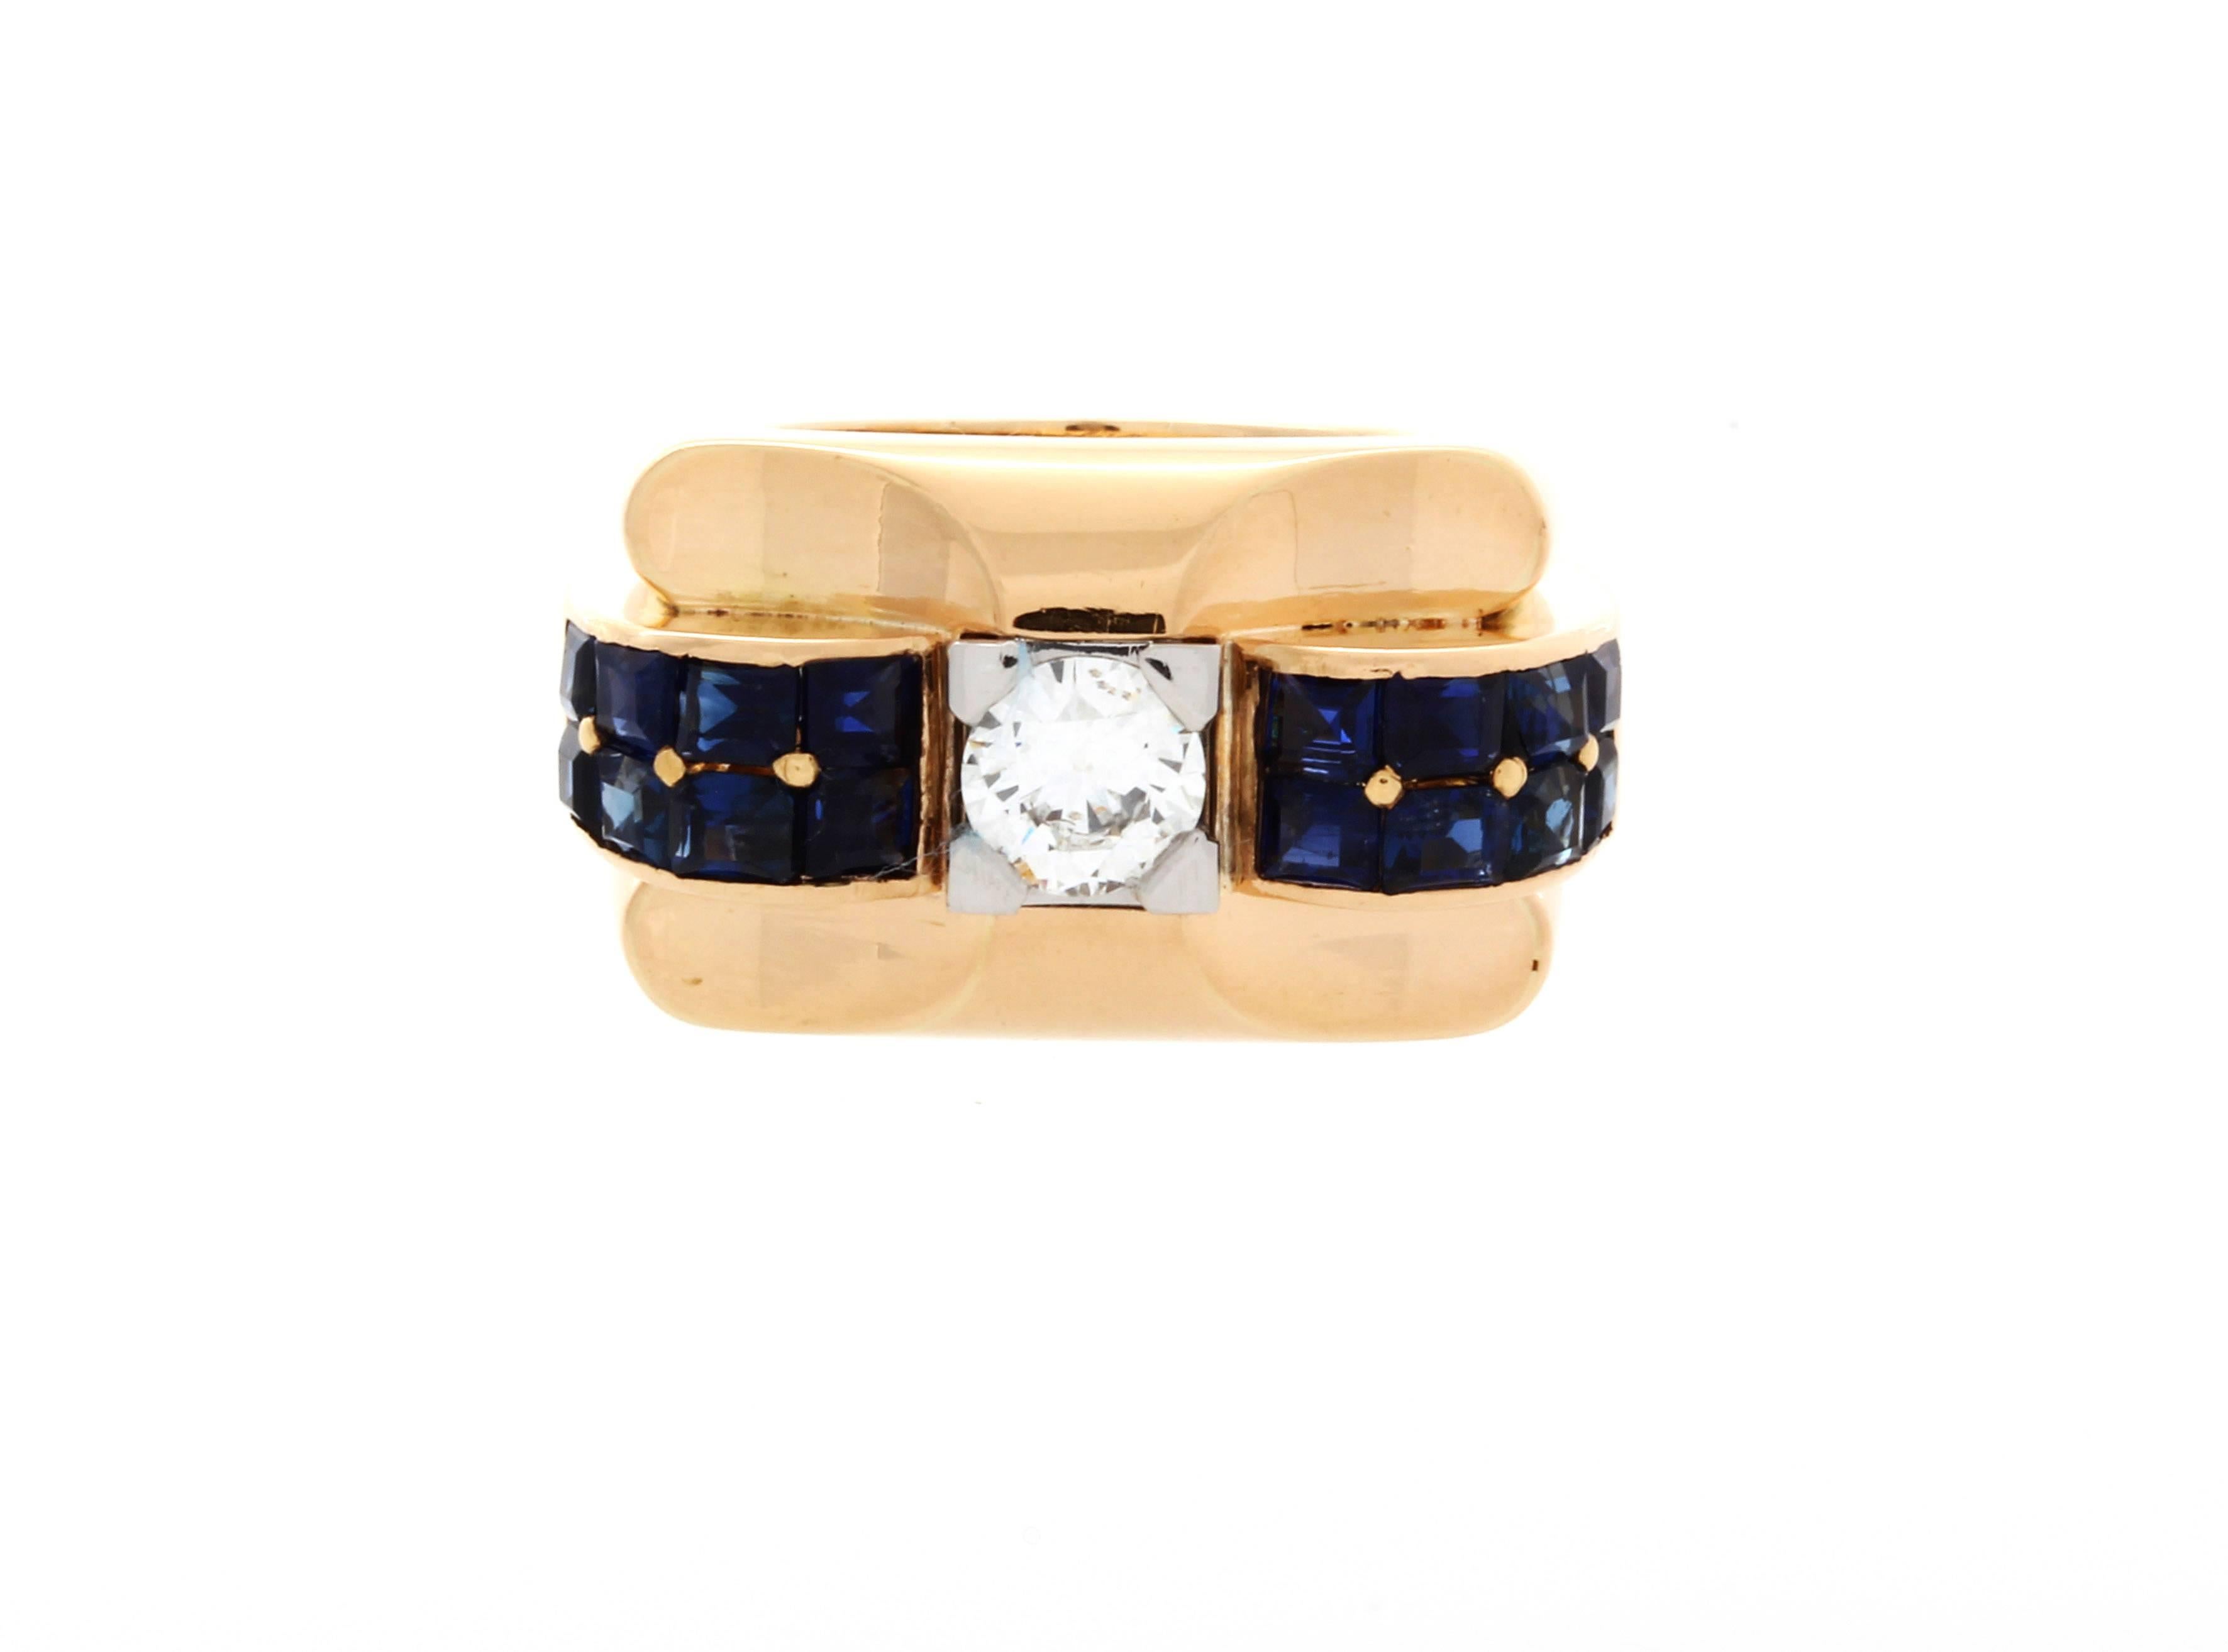 Boucheron diamond and blue sapphire ring in 18K yellow gold. Diamond center stone .75ct, Six blue sapphires on each side of the center stone, Stamped: 